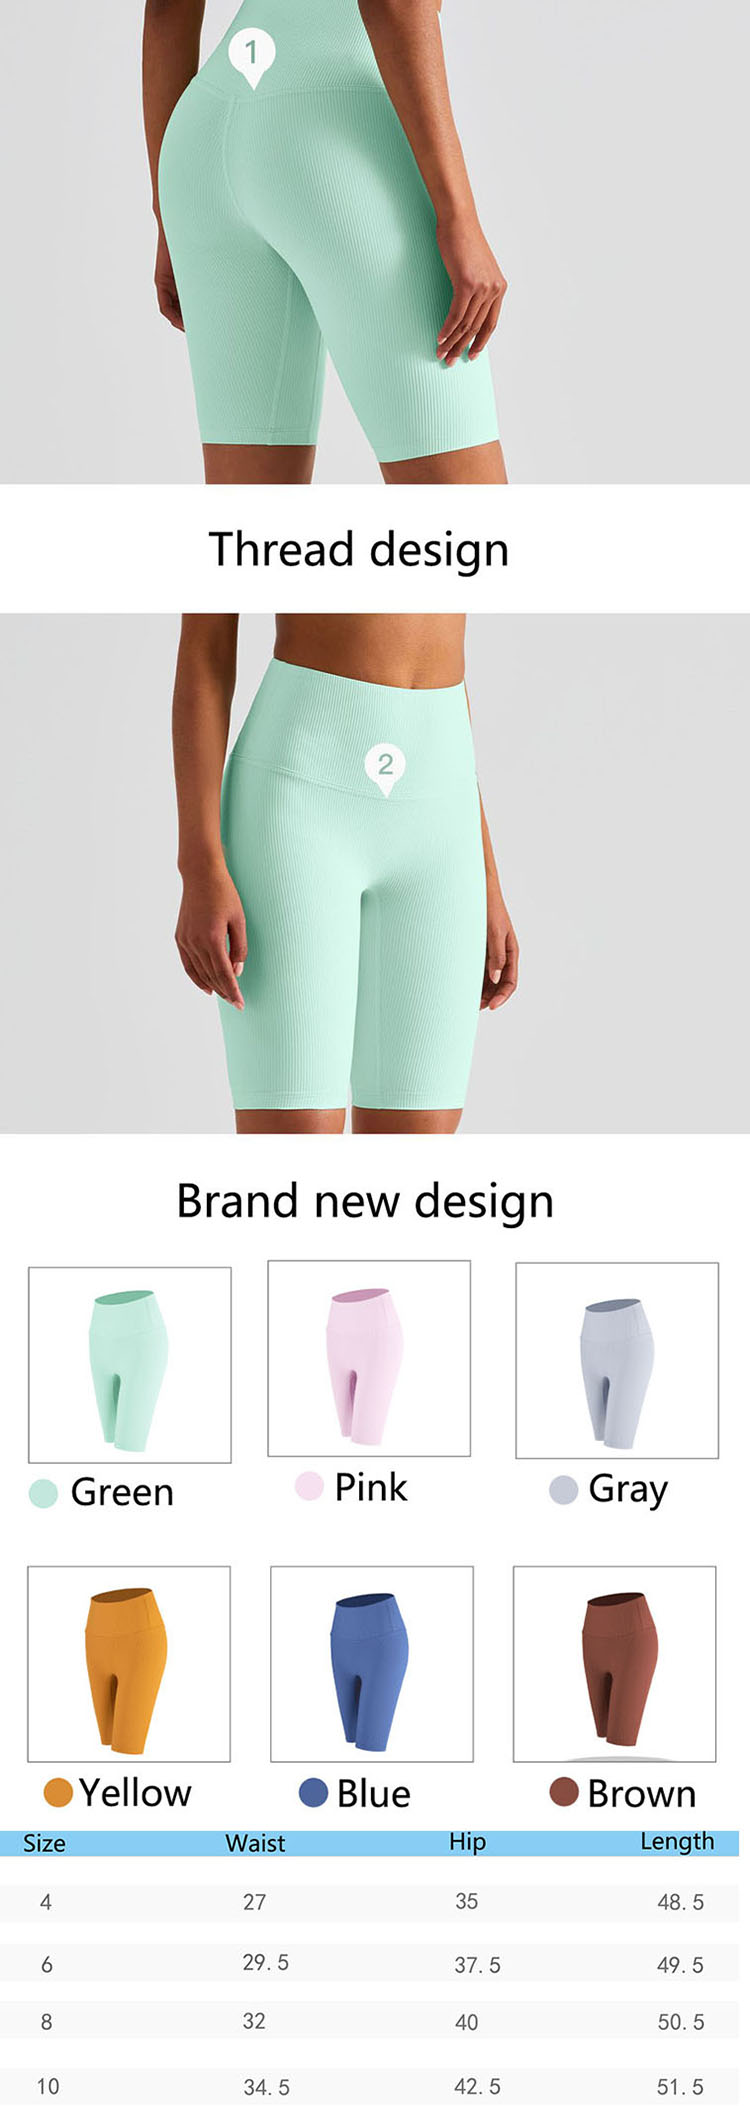 The thread decoration of lime green yoga pants is mainly subtle and low-key